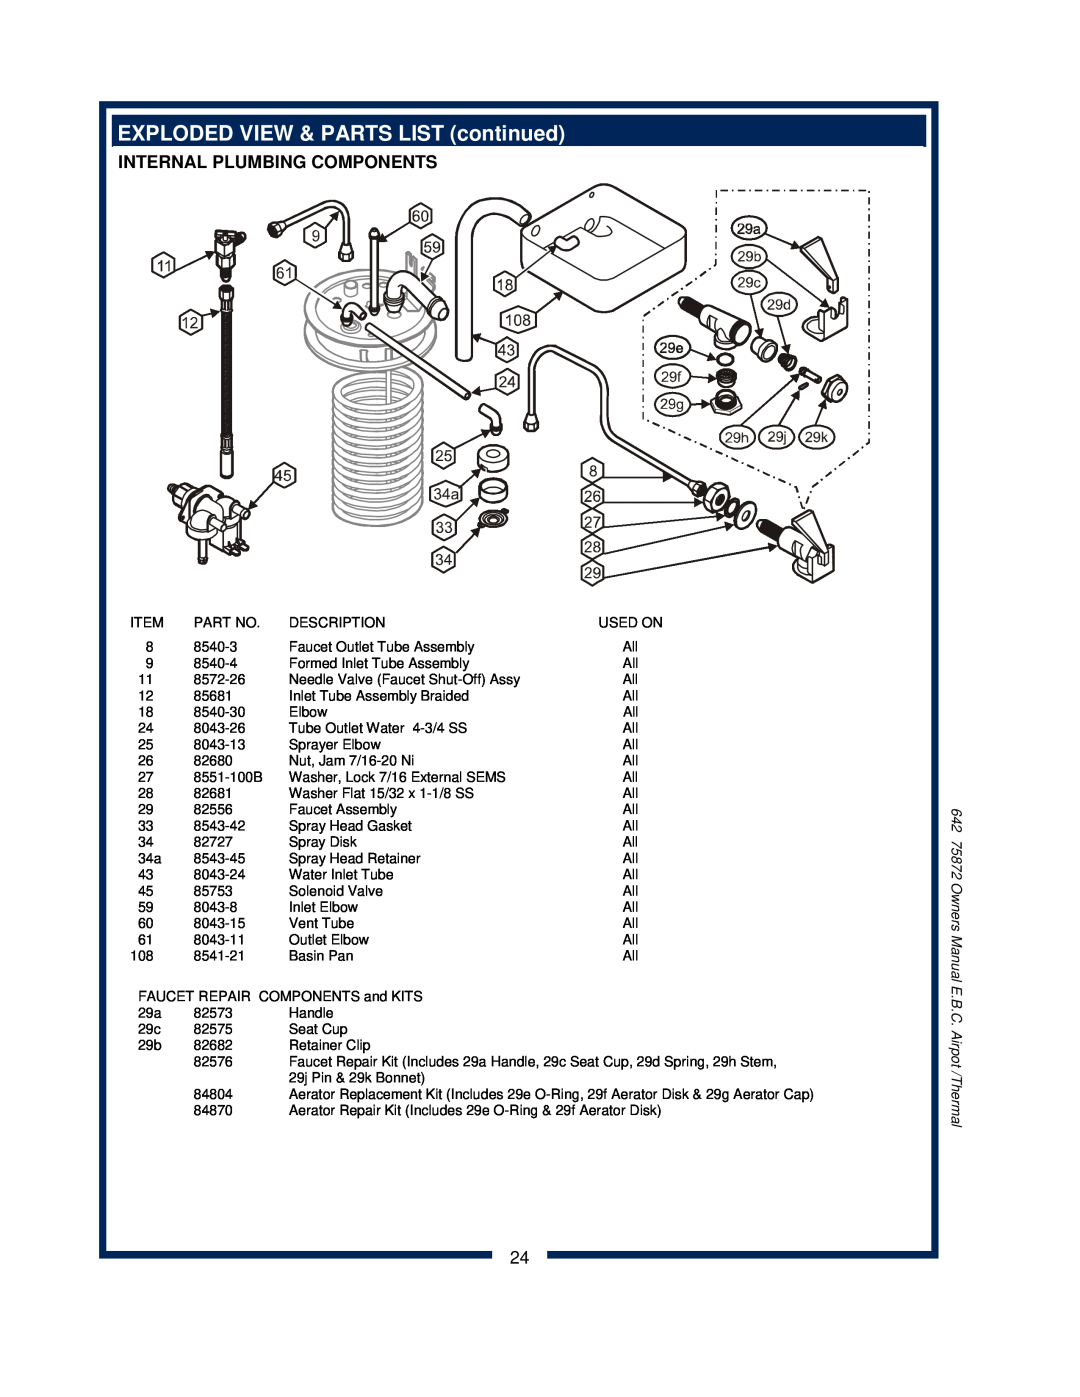 Bloomfield 1086, 1080, 1082XL, 1088 EXPLODED VIEW & PARTS LIST continued, Internal Plumbing Components, 75872, Manual 